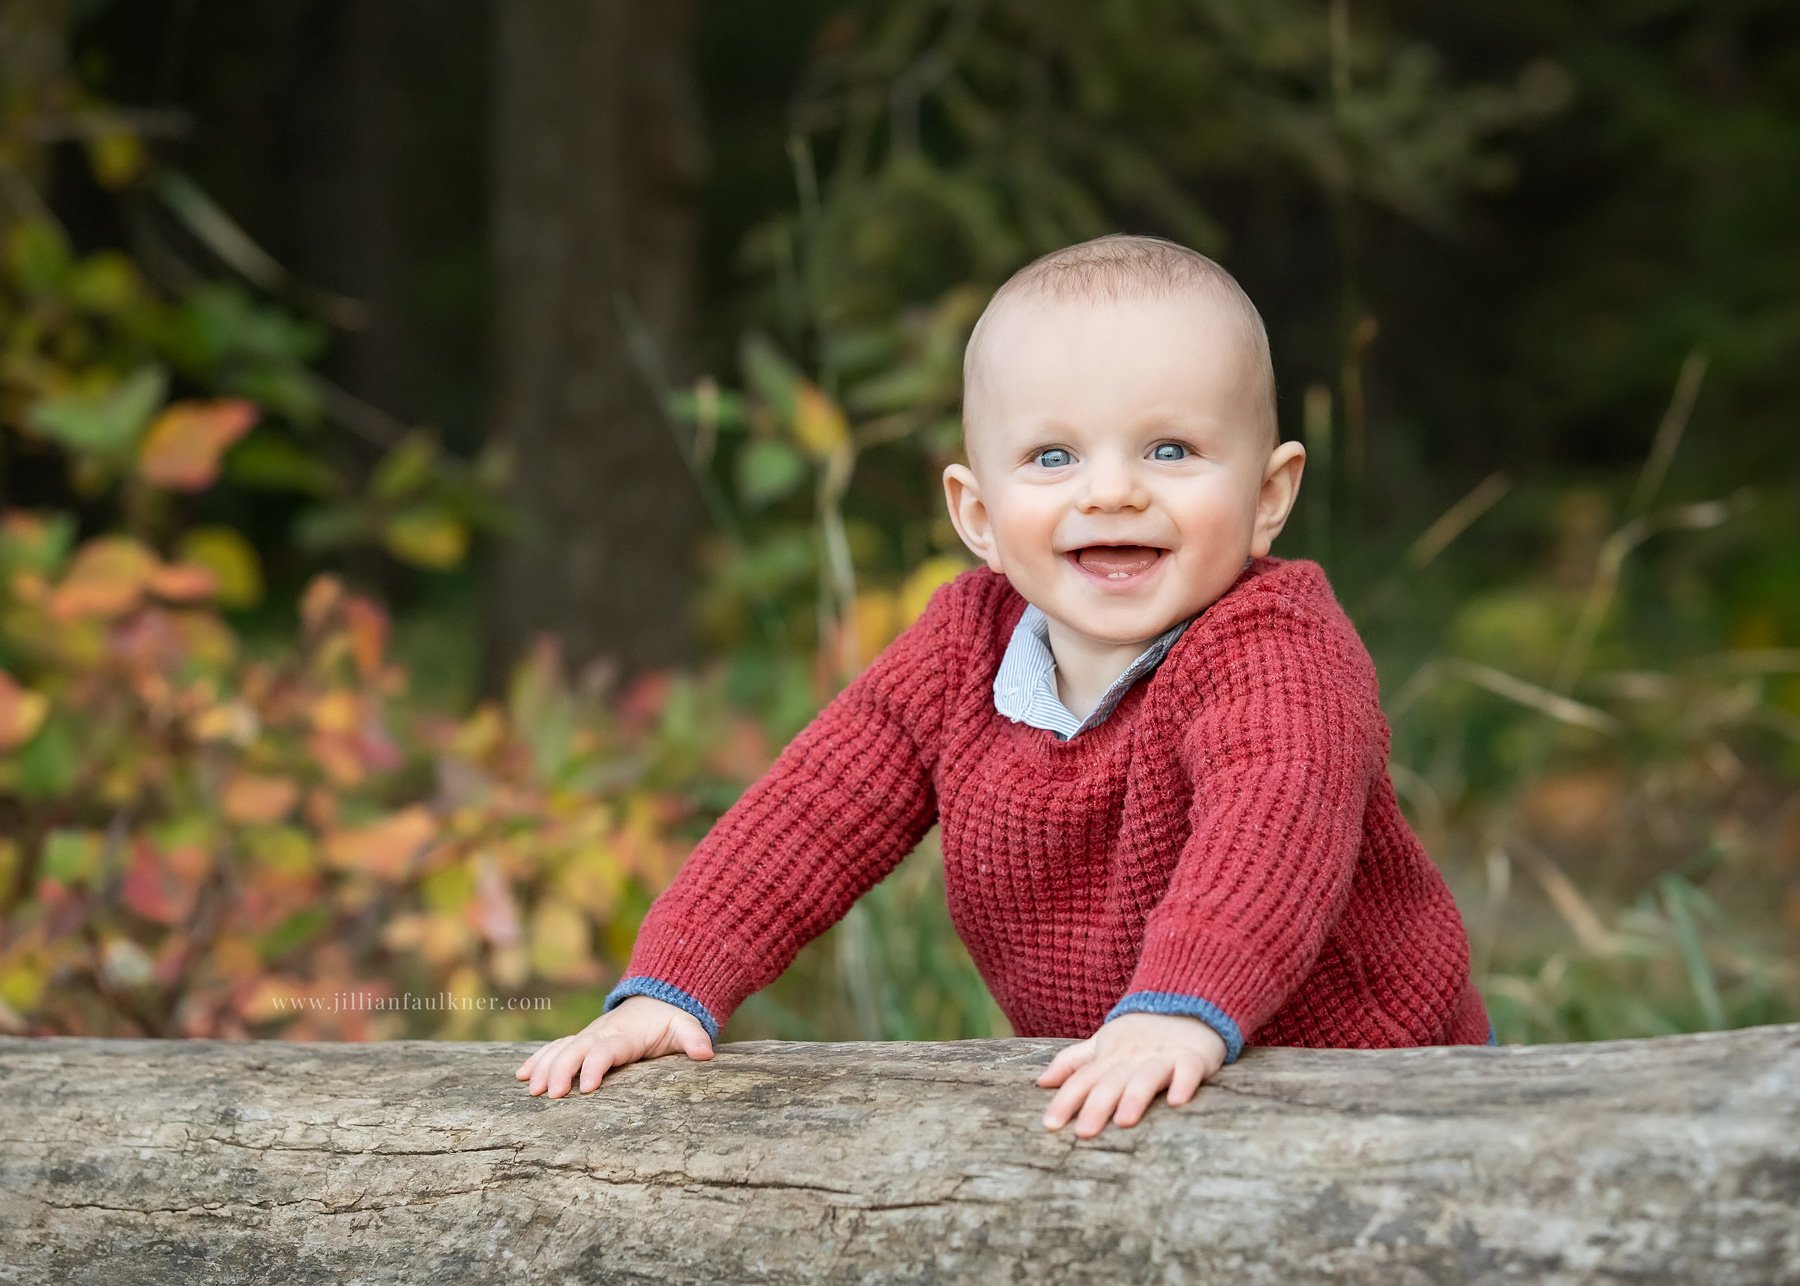 What to Wear to a Fall Family Photo Shoot